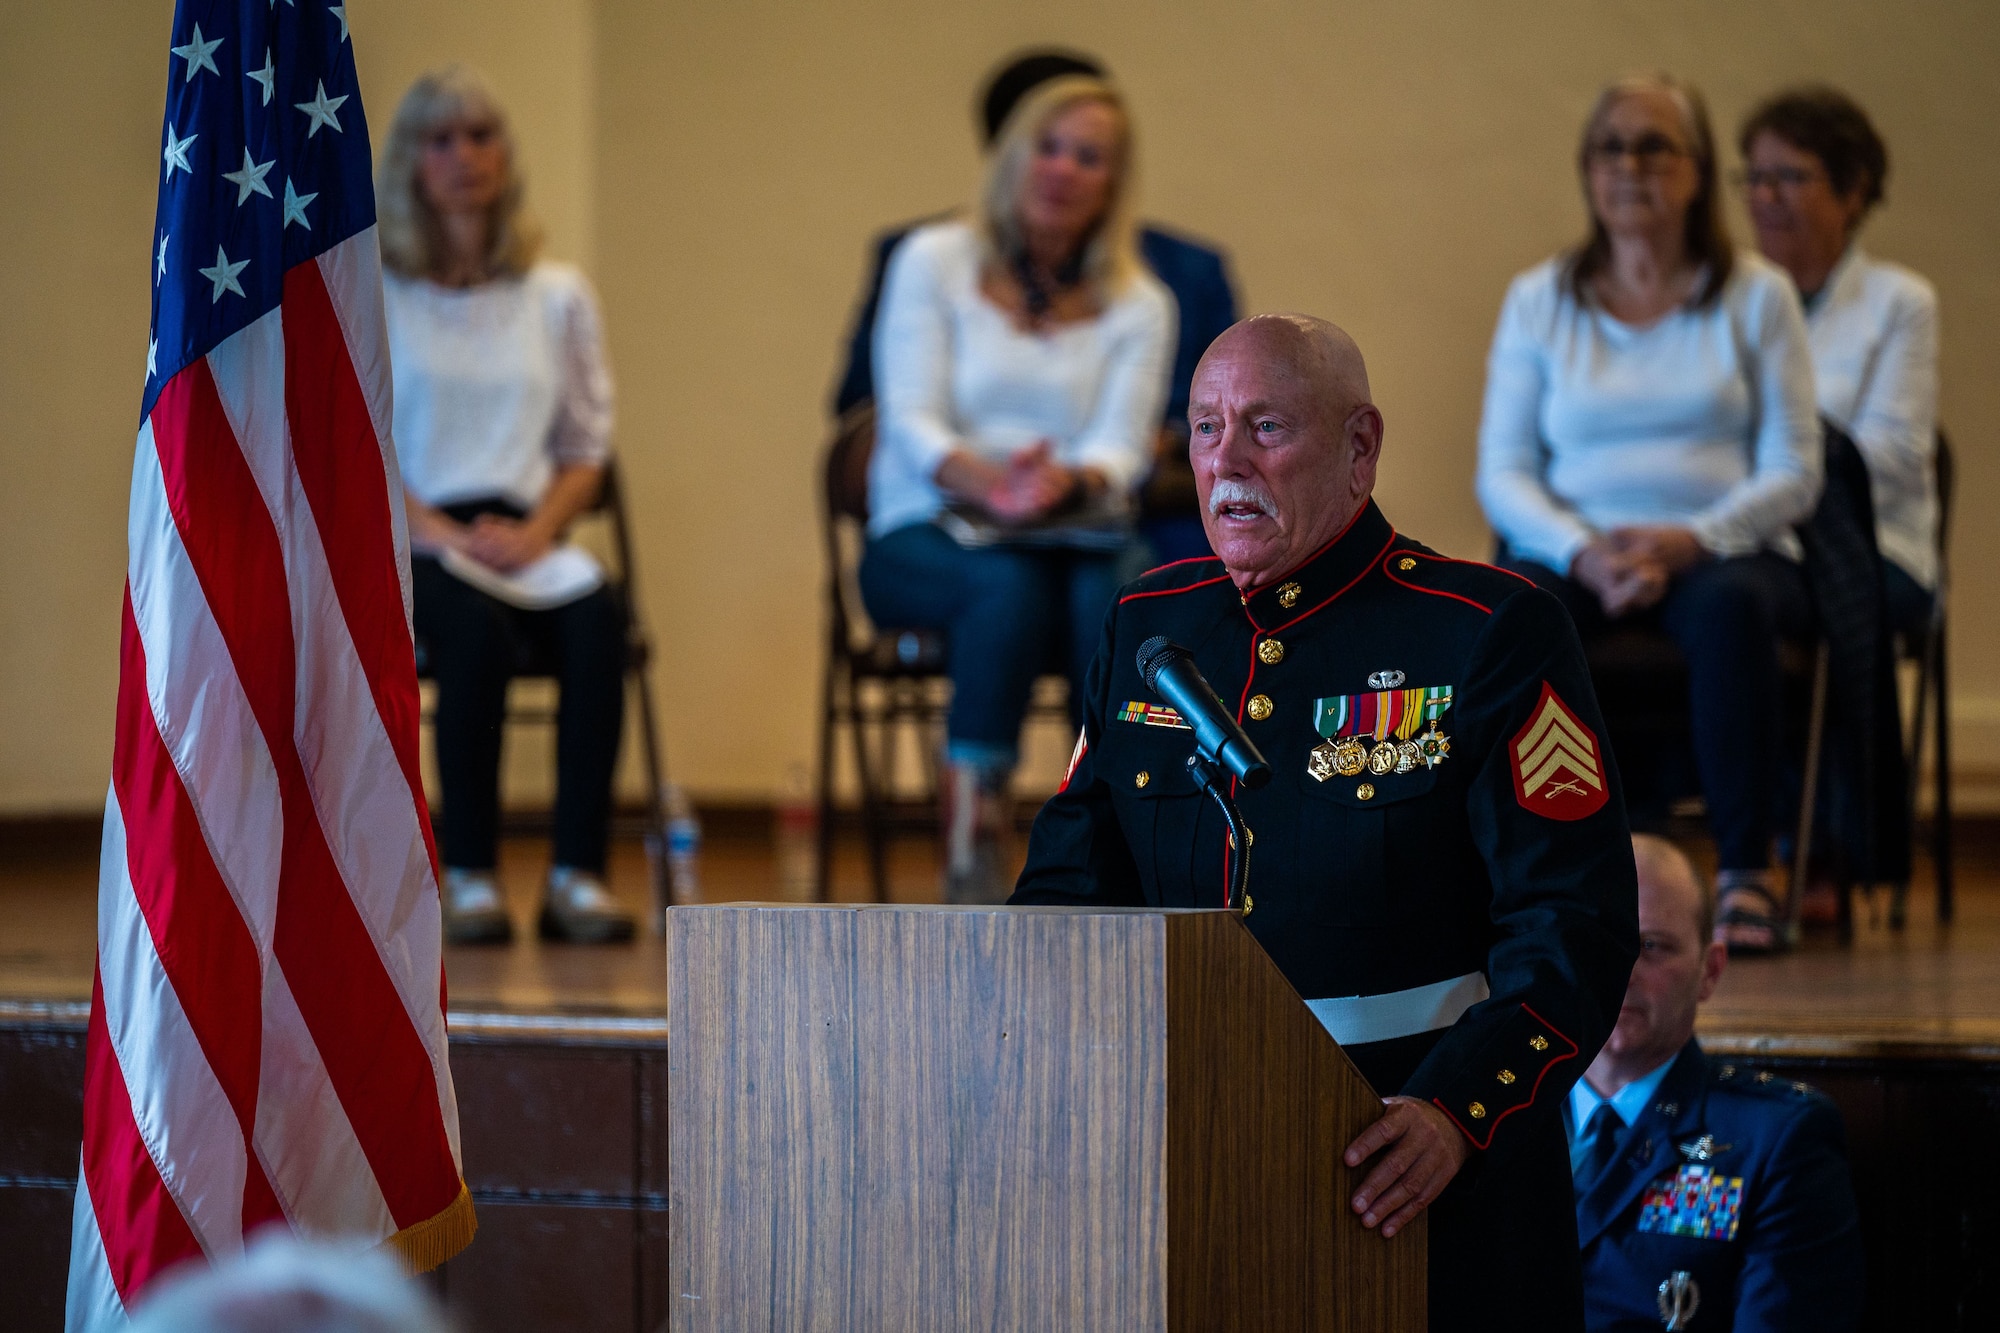 A U.S. Marine Veteran speaks to audience members during a Memorial Day ceremony at the Solvang Veterans Memorial Hall in Solvang, Calif., May 29, 2023. U.S. Space Force Maj. Gen. Douglas A. Schiess, Combined Force Space Component Command commander, and Mrs. Debbie Schiess, attended the Memorial Day ceremony where General Schiess gave the keynote speech to over 200 attendees that included veterans from the Global War on Terrorism, Vietnam, Korea and even one veteran from WWII. The ceremony also included the raising on the American Flag by a local Cub Scouts group and a laying of a wreath with a Gold Star family member. (U.S. Space Force photo by Tech. Sgt. Luke Kitterman)